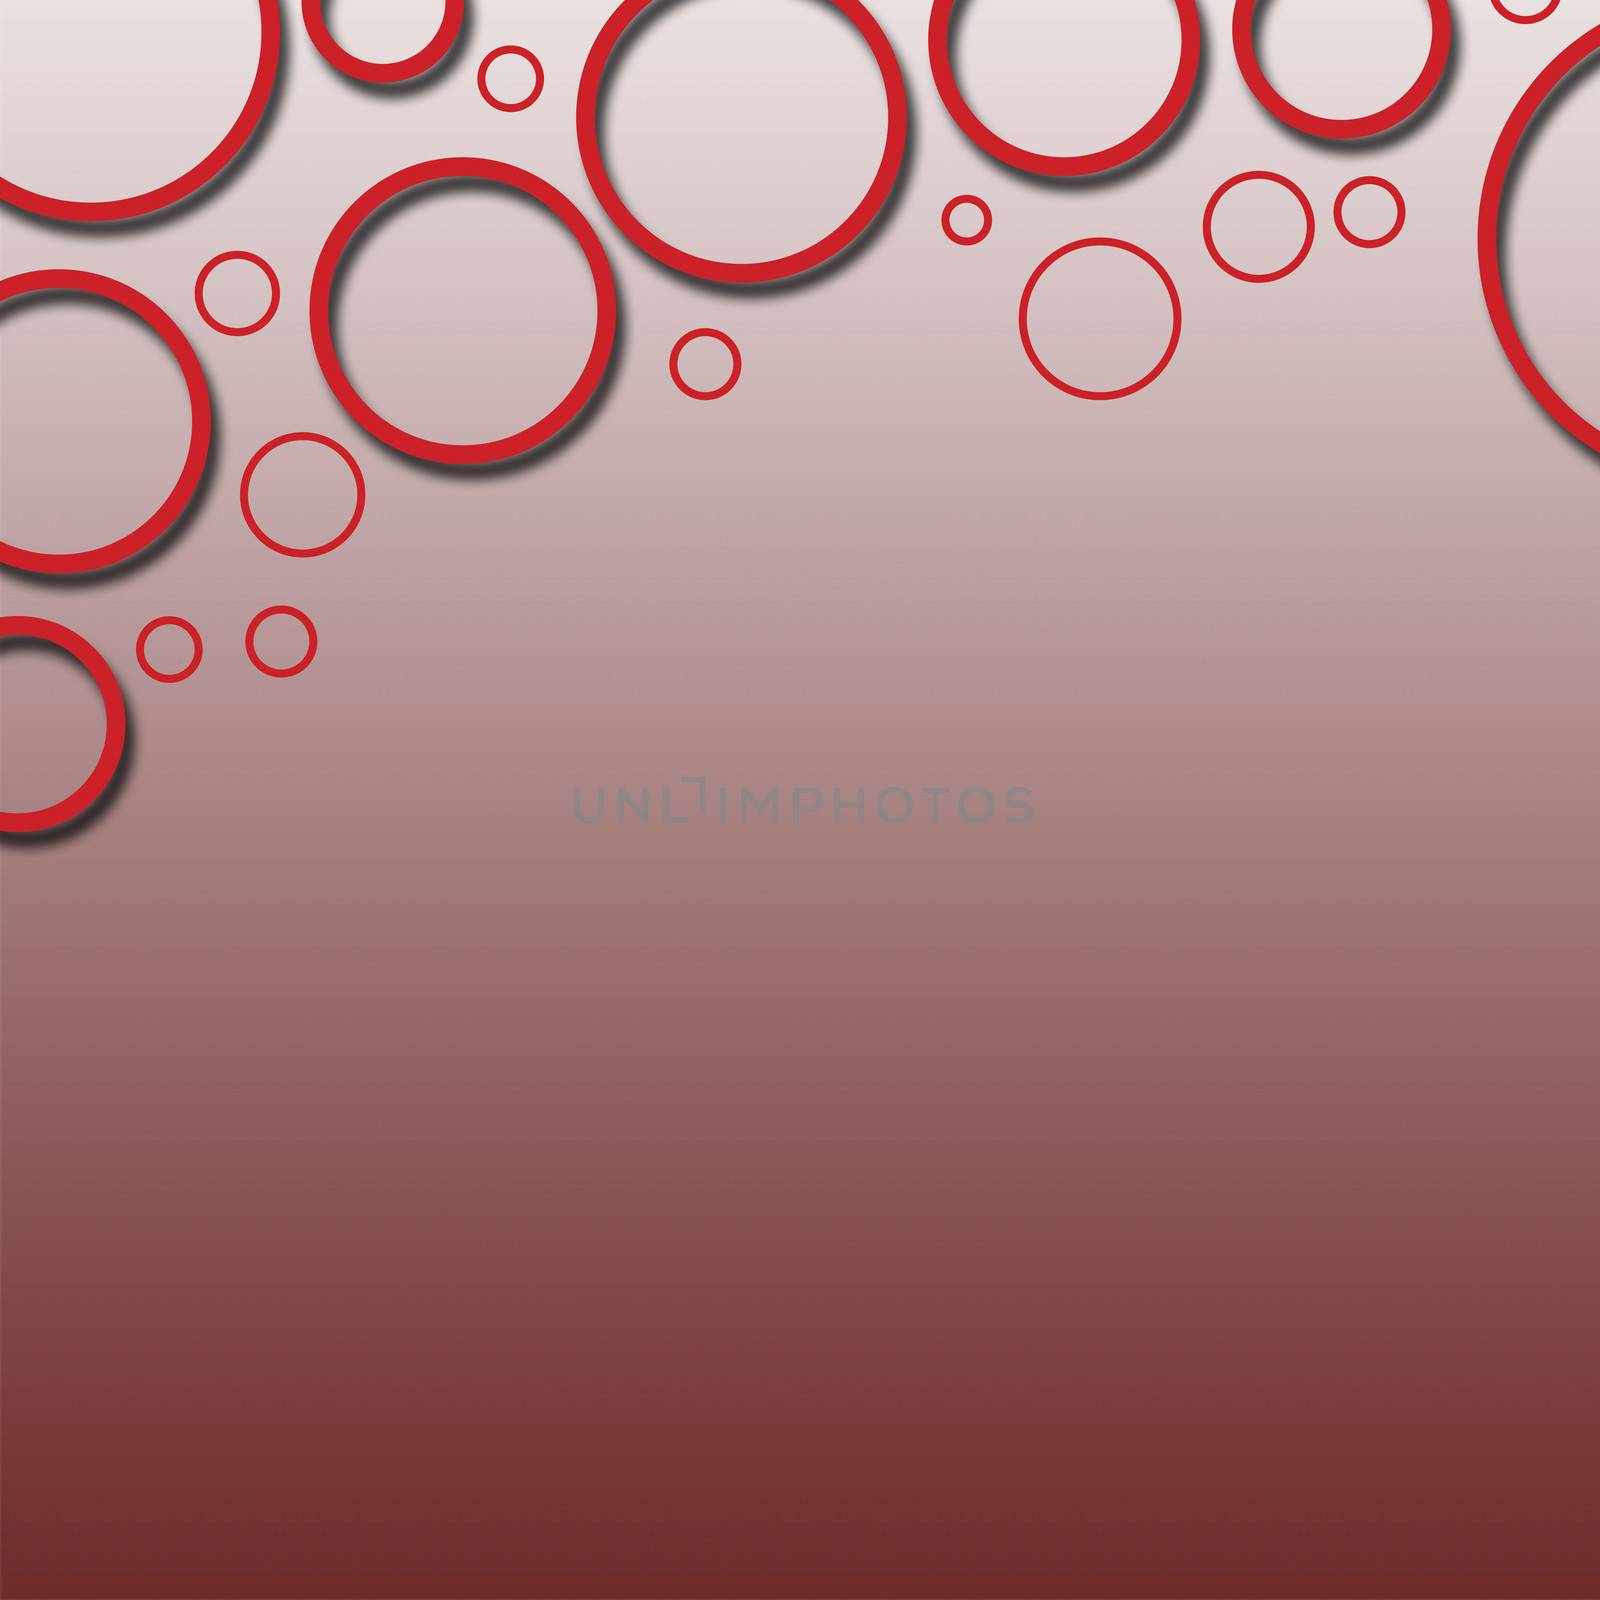 red circle three dee abstract background  by ammza12